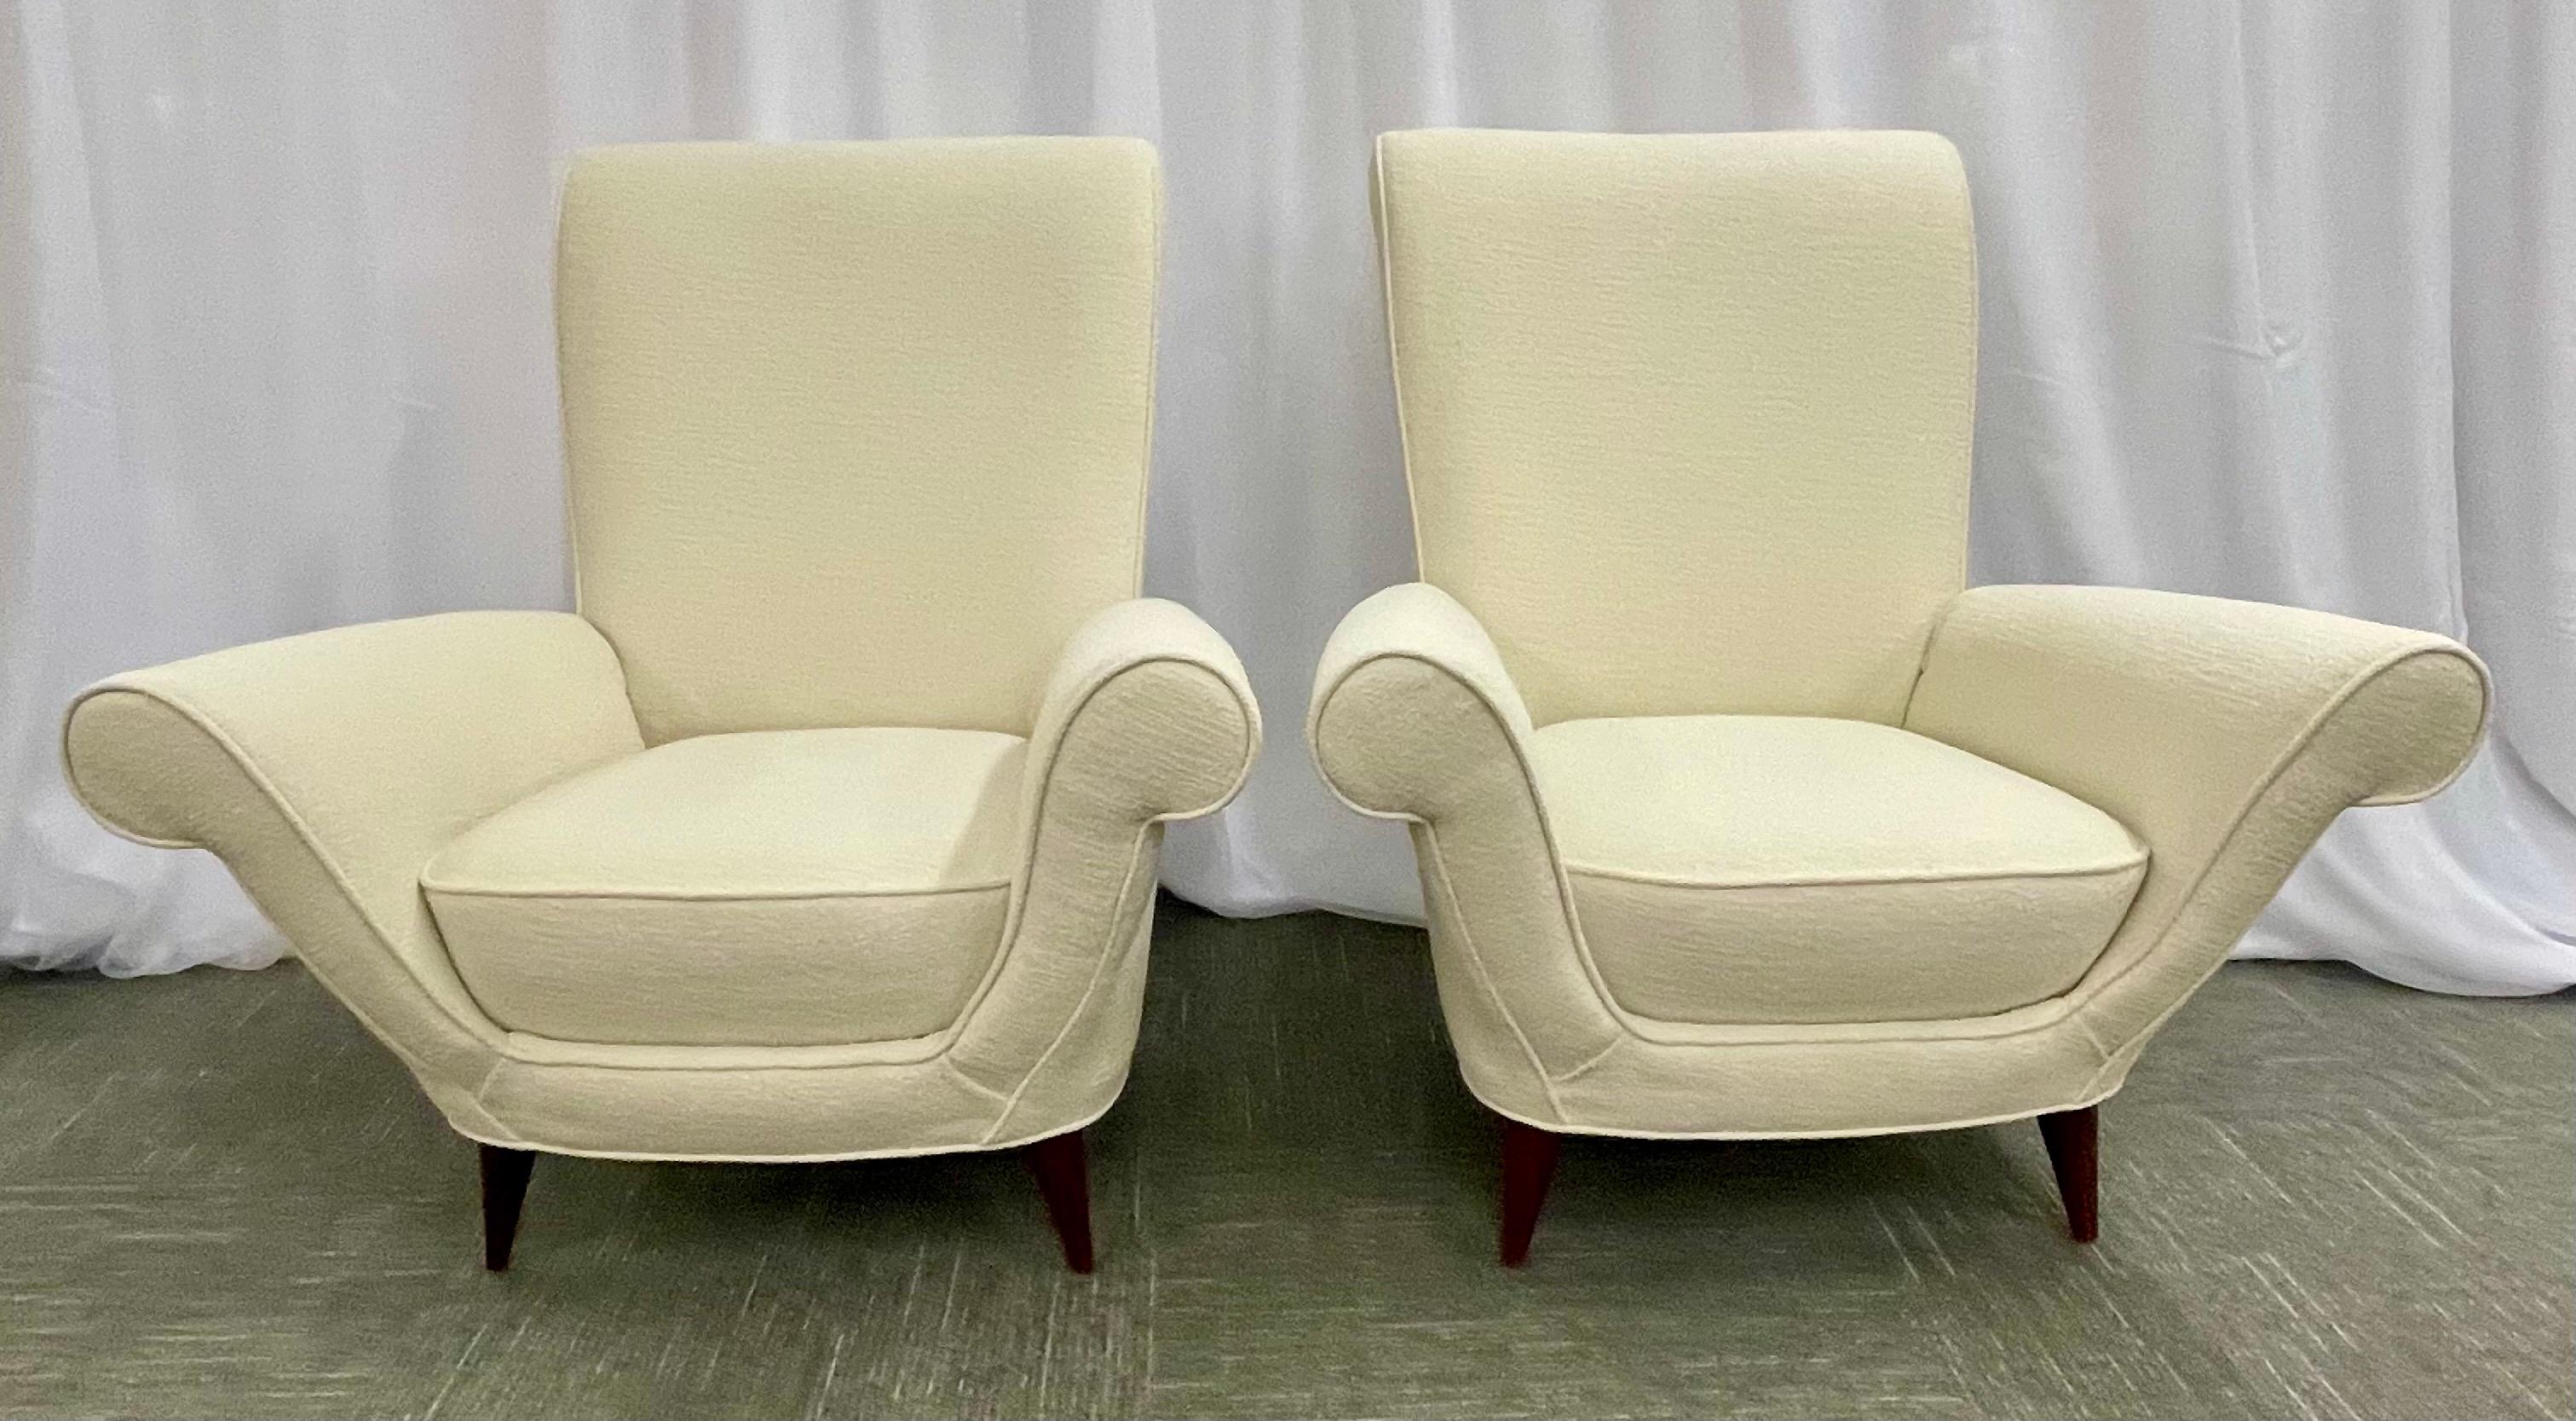 Paola Buffa Style, Mid-Century Modern, Lounge Chairs, White Bouclé, Italy, 1960s For Sale 2